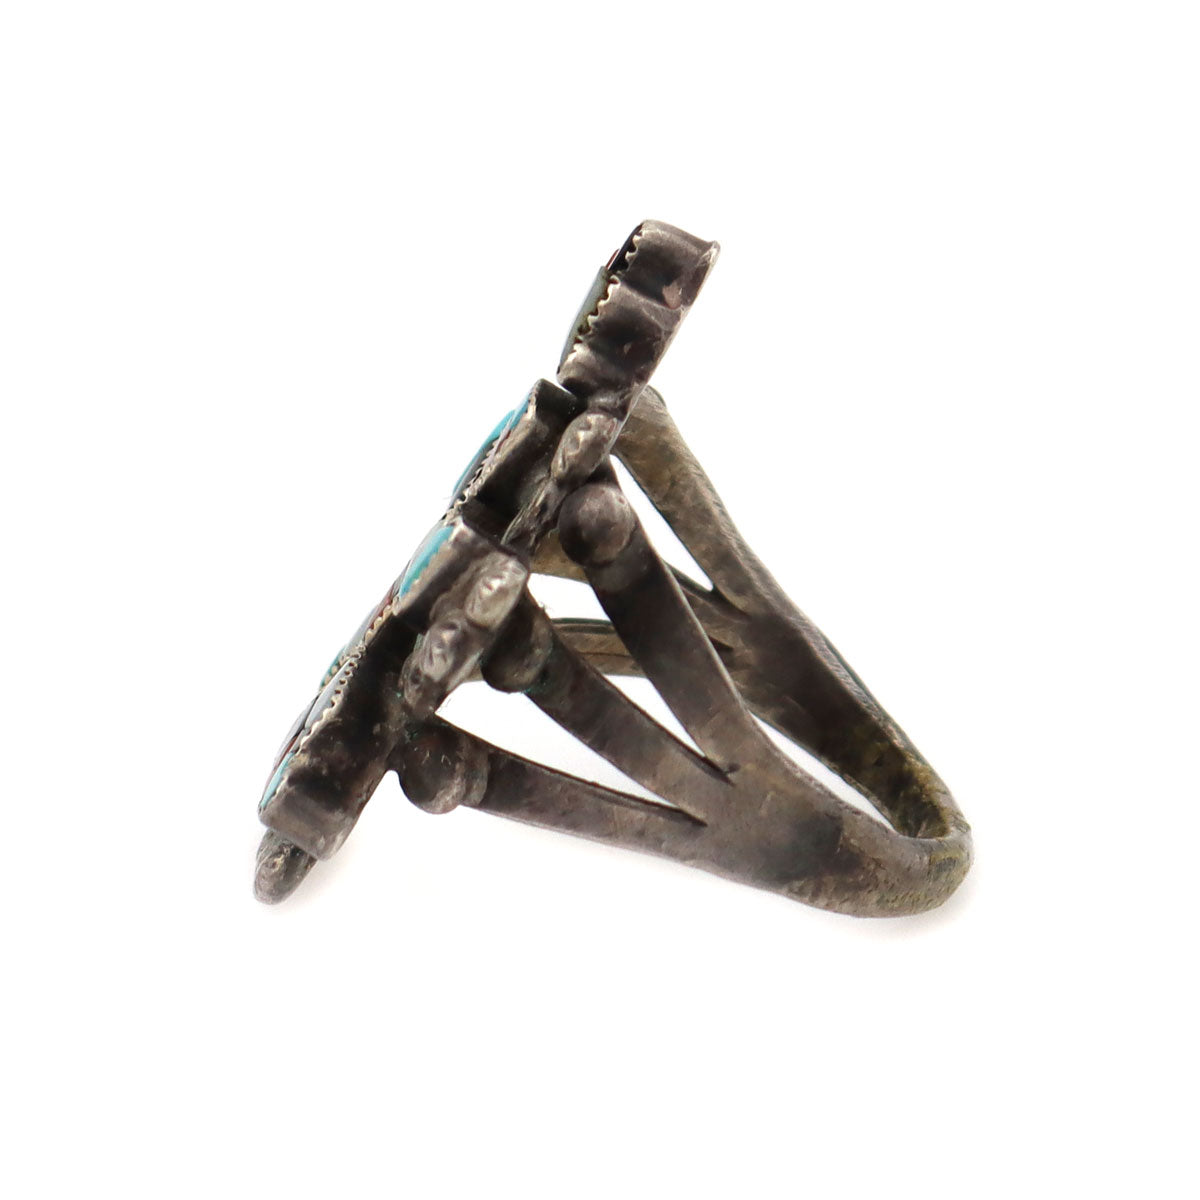 Zuni Multi-Stone Channel Inlay and Silver Knifewing God Ring c. 1940s, size 7 (J91051-0821-003)1